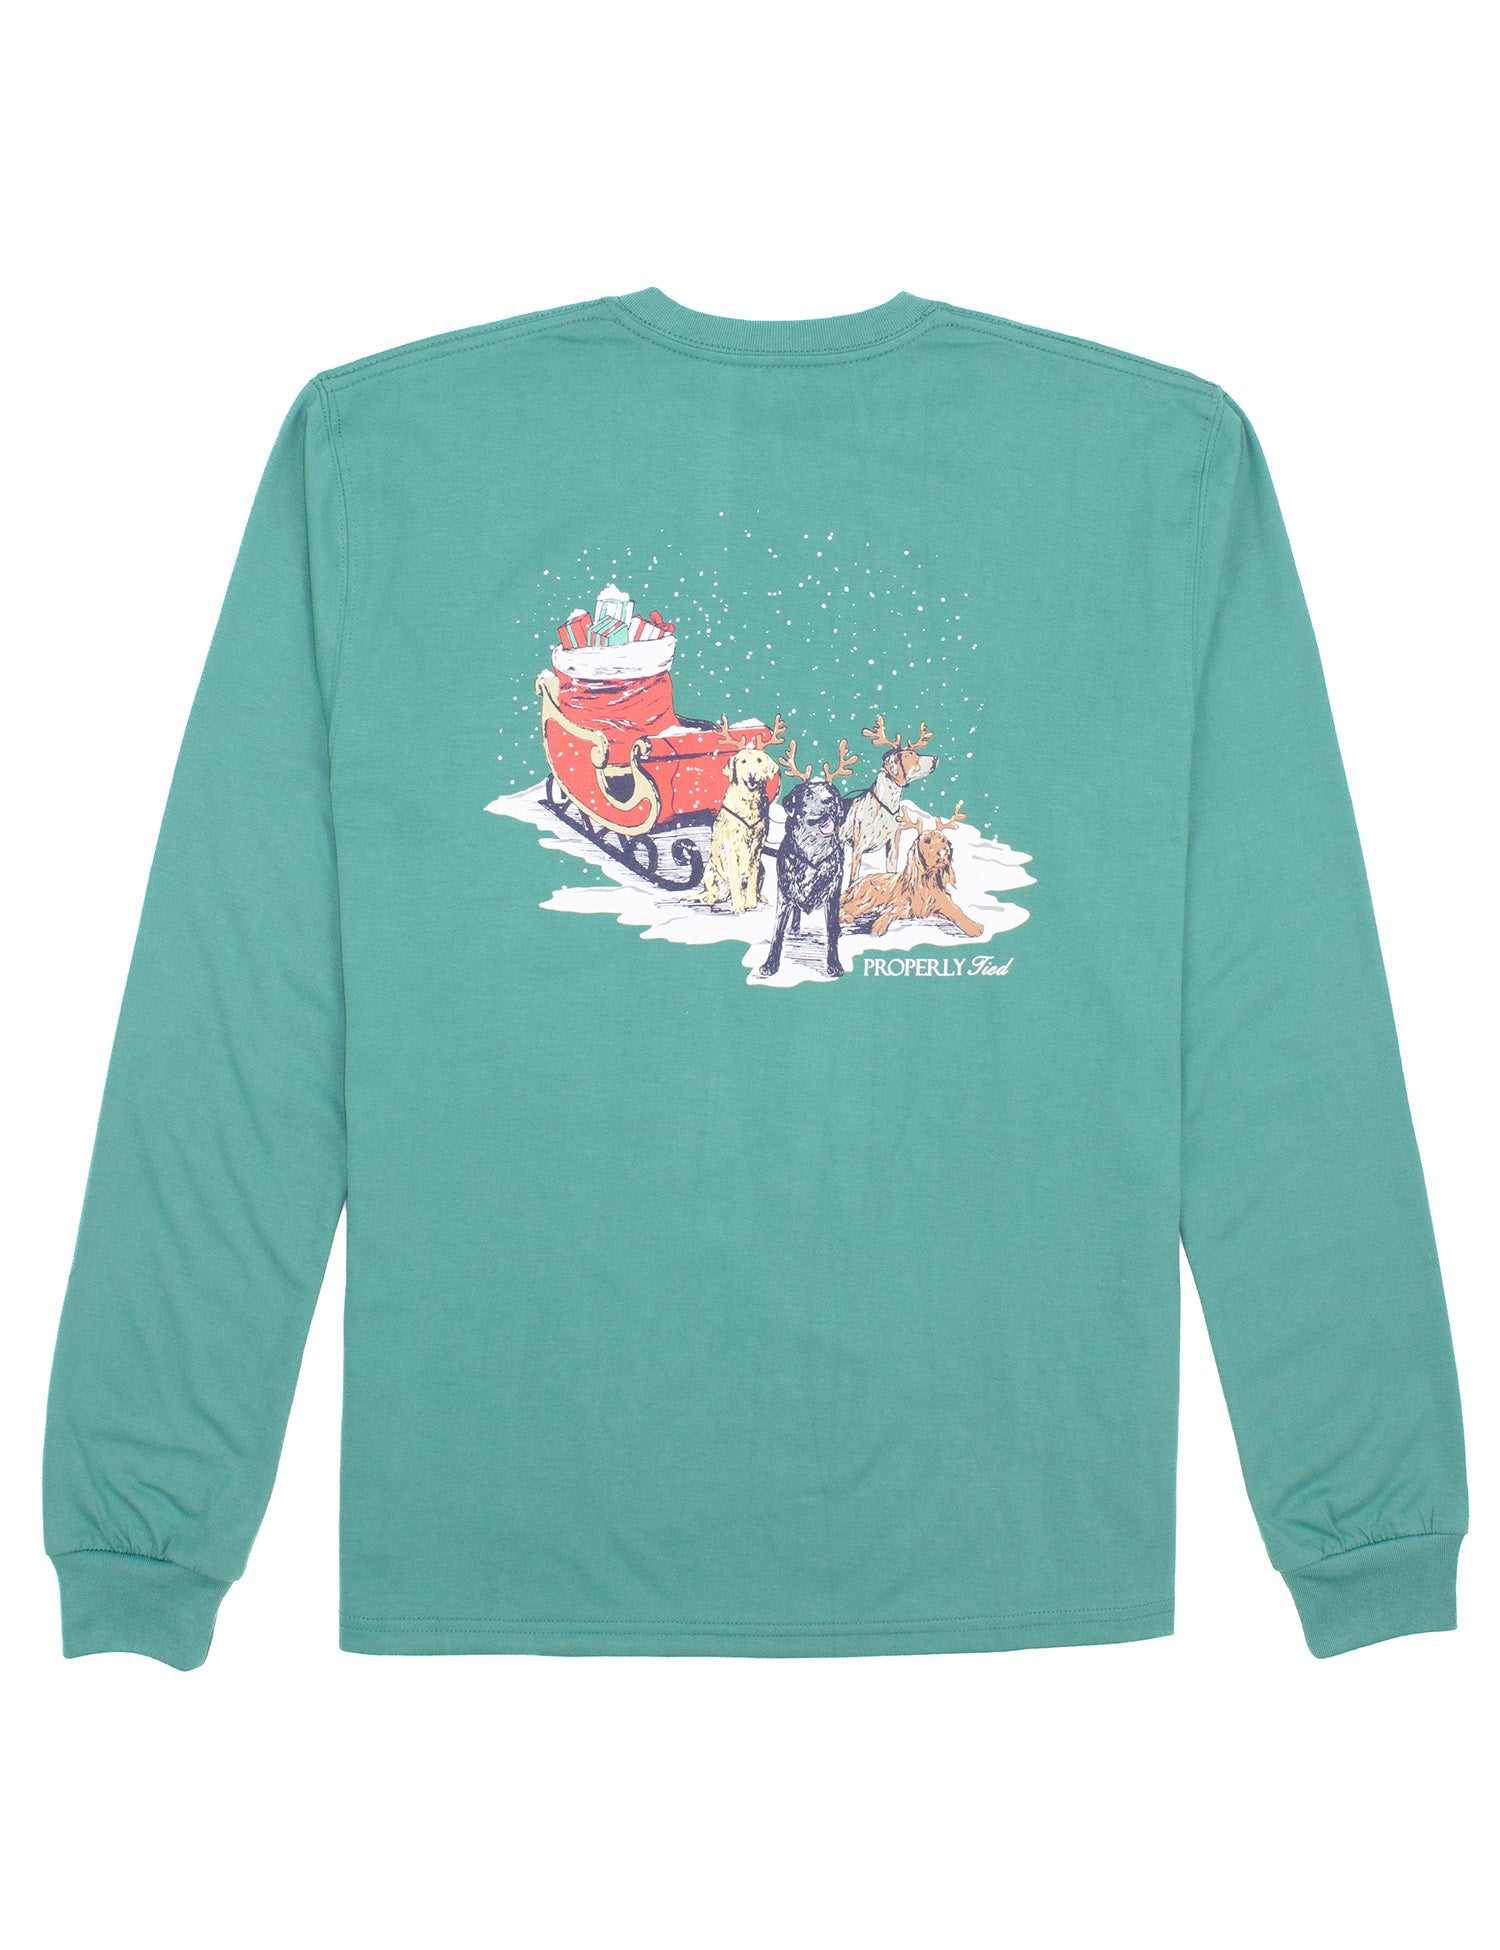 Sleigh Dogs LS Teal